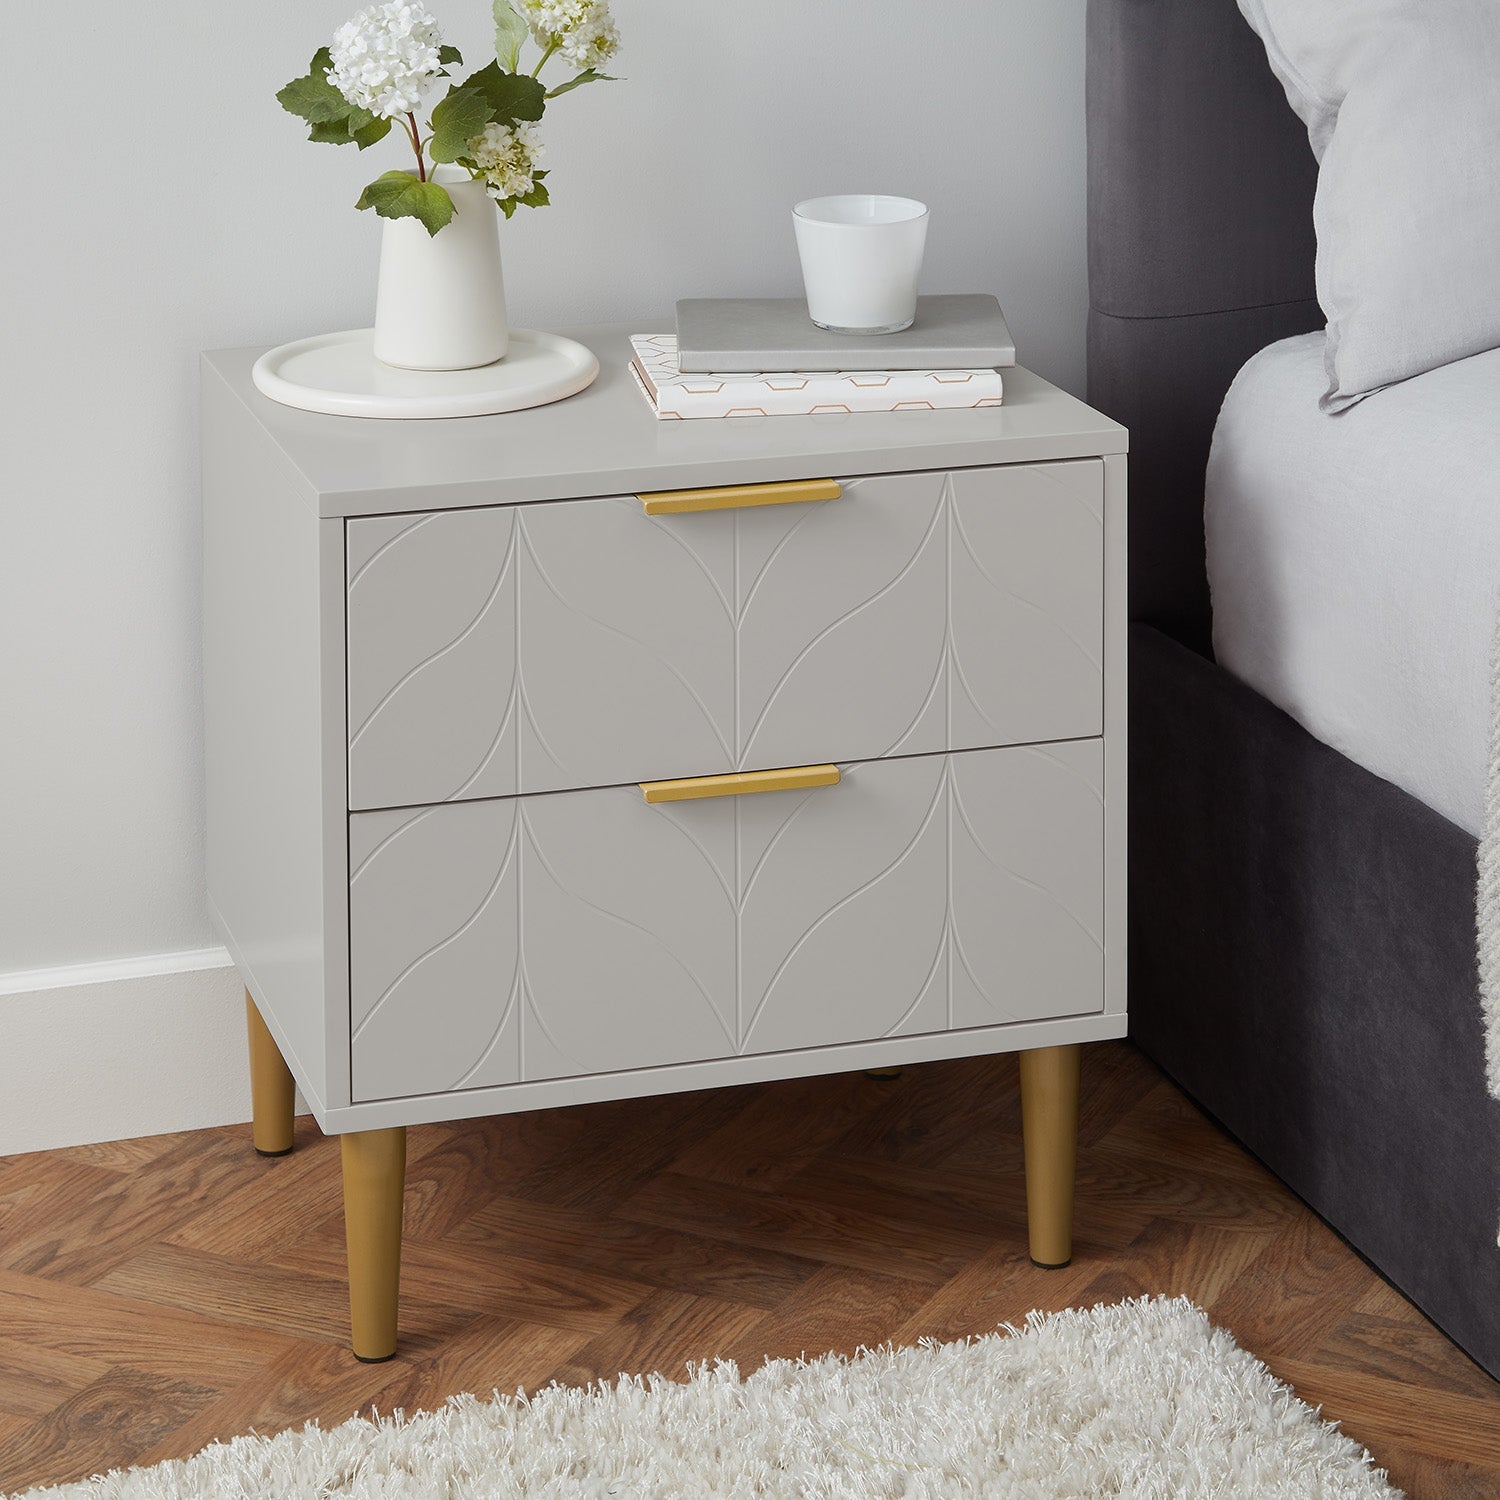 Gloria bedside table - grey and brass effect - Laura James